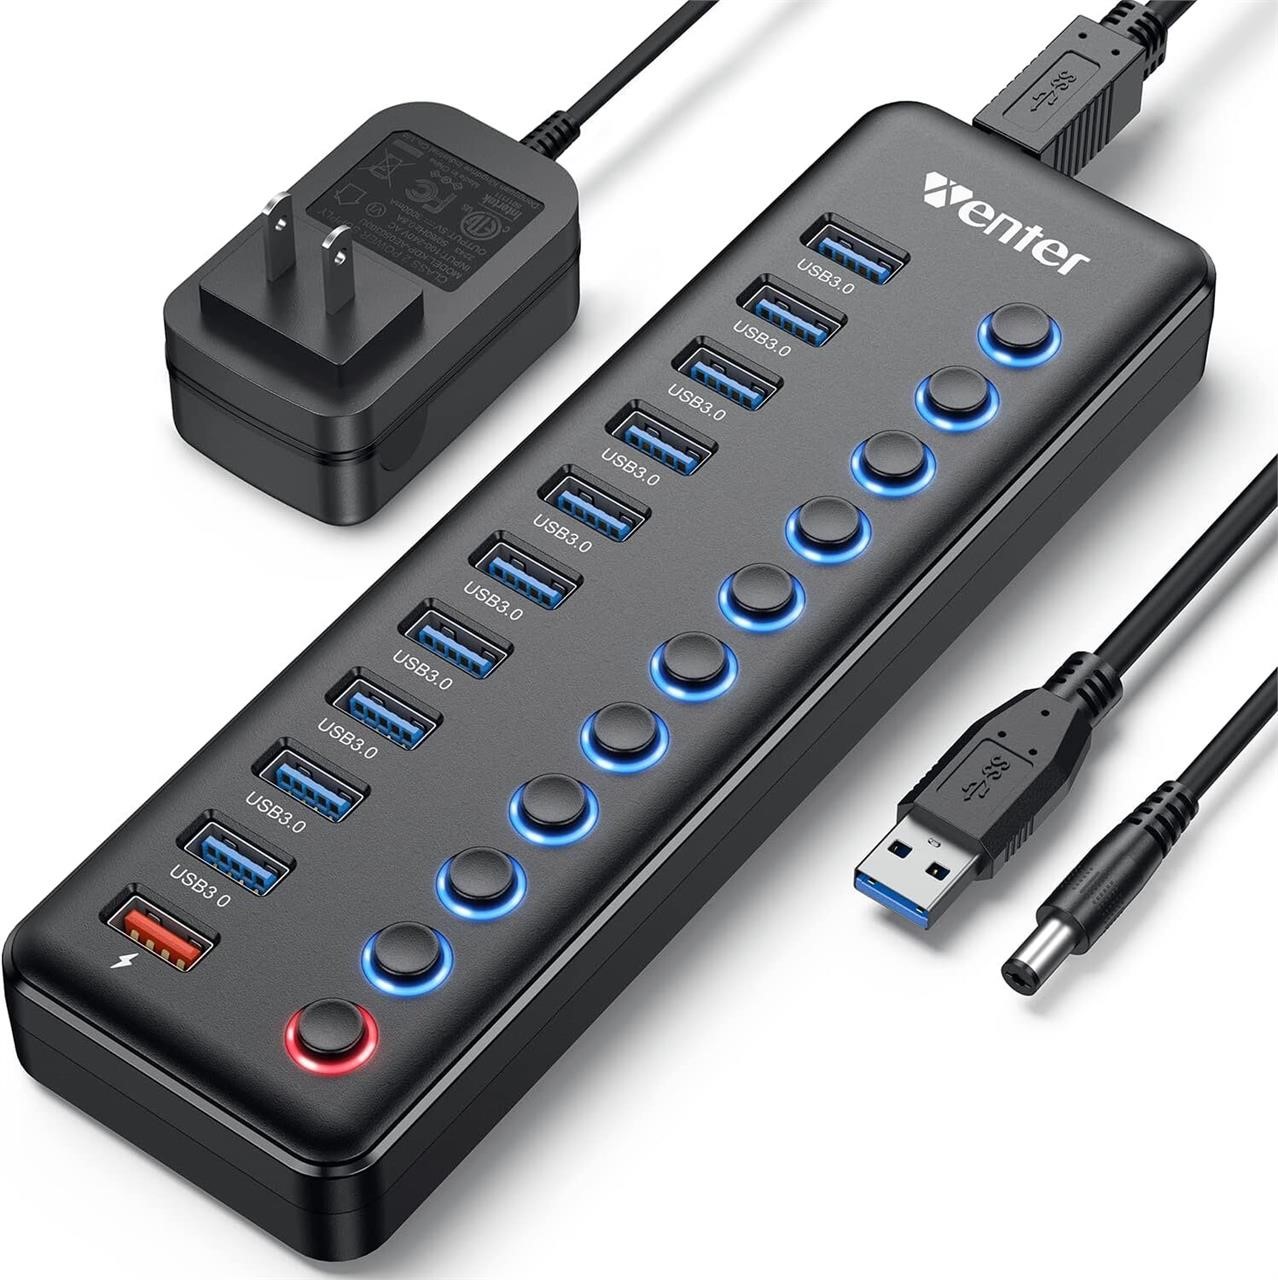 $29  Wenter 11-Port USB 3.0 Hub with Power Adapter